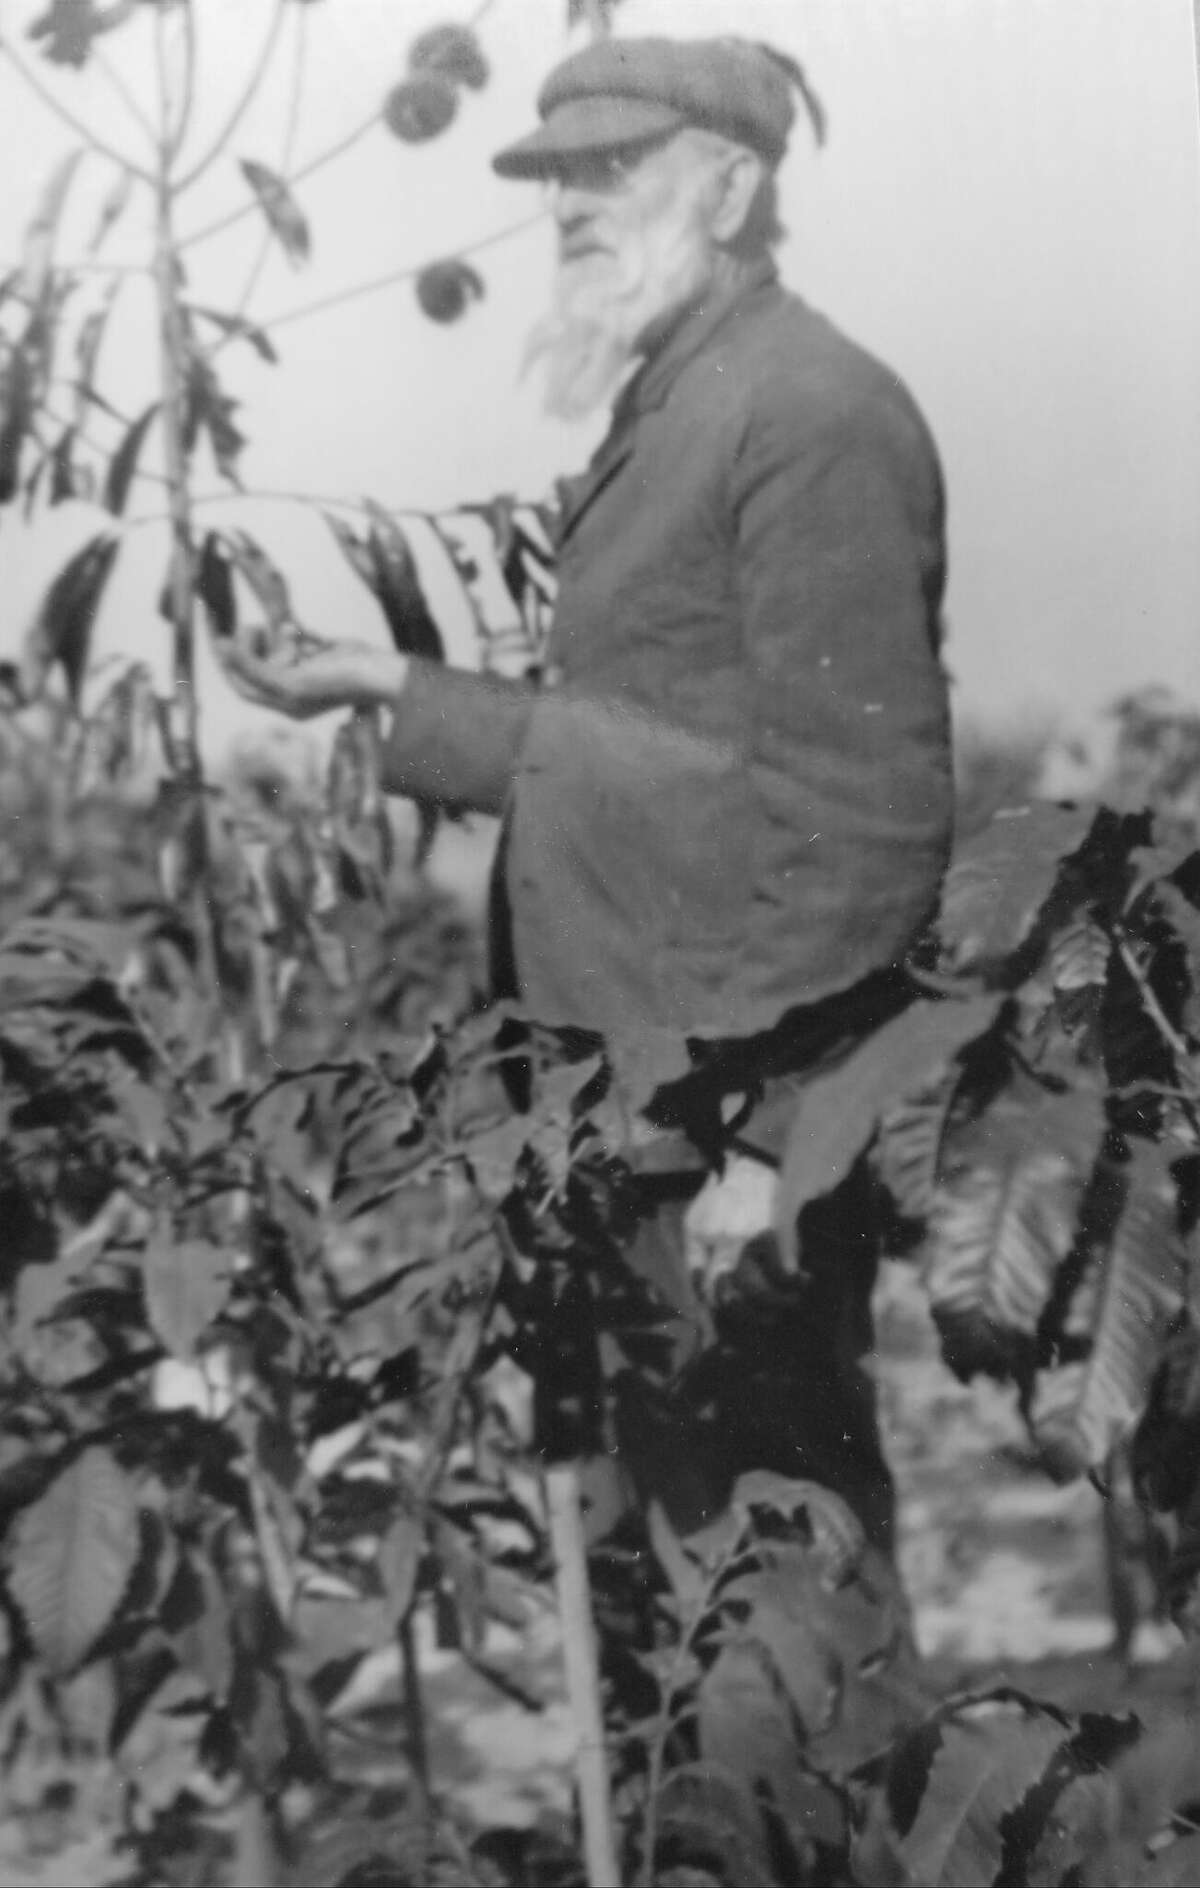 E. A. Riehl,  founder of Evergreen Heights home place, is shown standing next to a new variety of chestnut tree he developed. Author, artist and storyteller Janet Grace Riehl will present “The Stories that Shape Us” at 7:30 p.m. Thursday, April 28, at Farley’s Music Hall in Elsah.